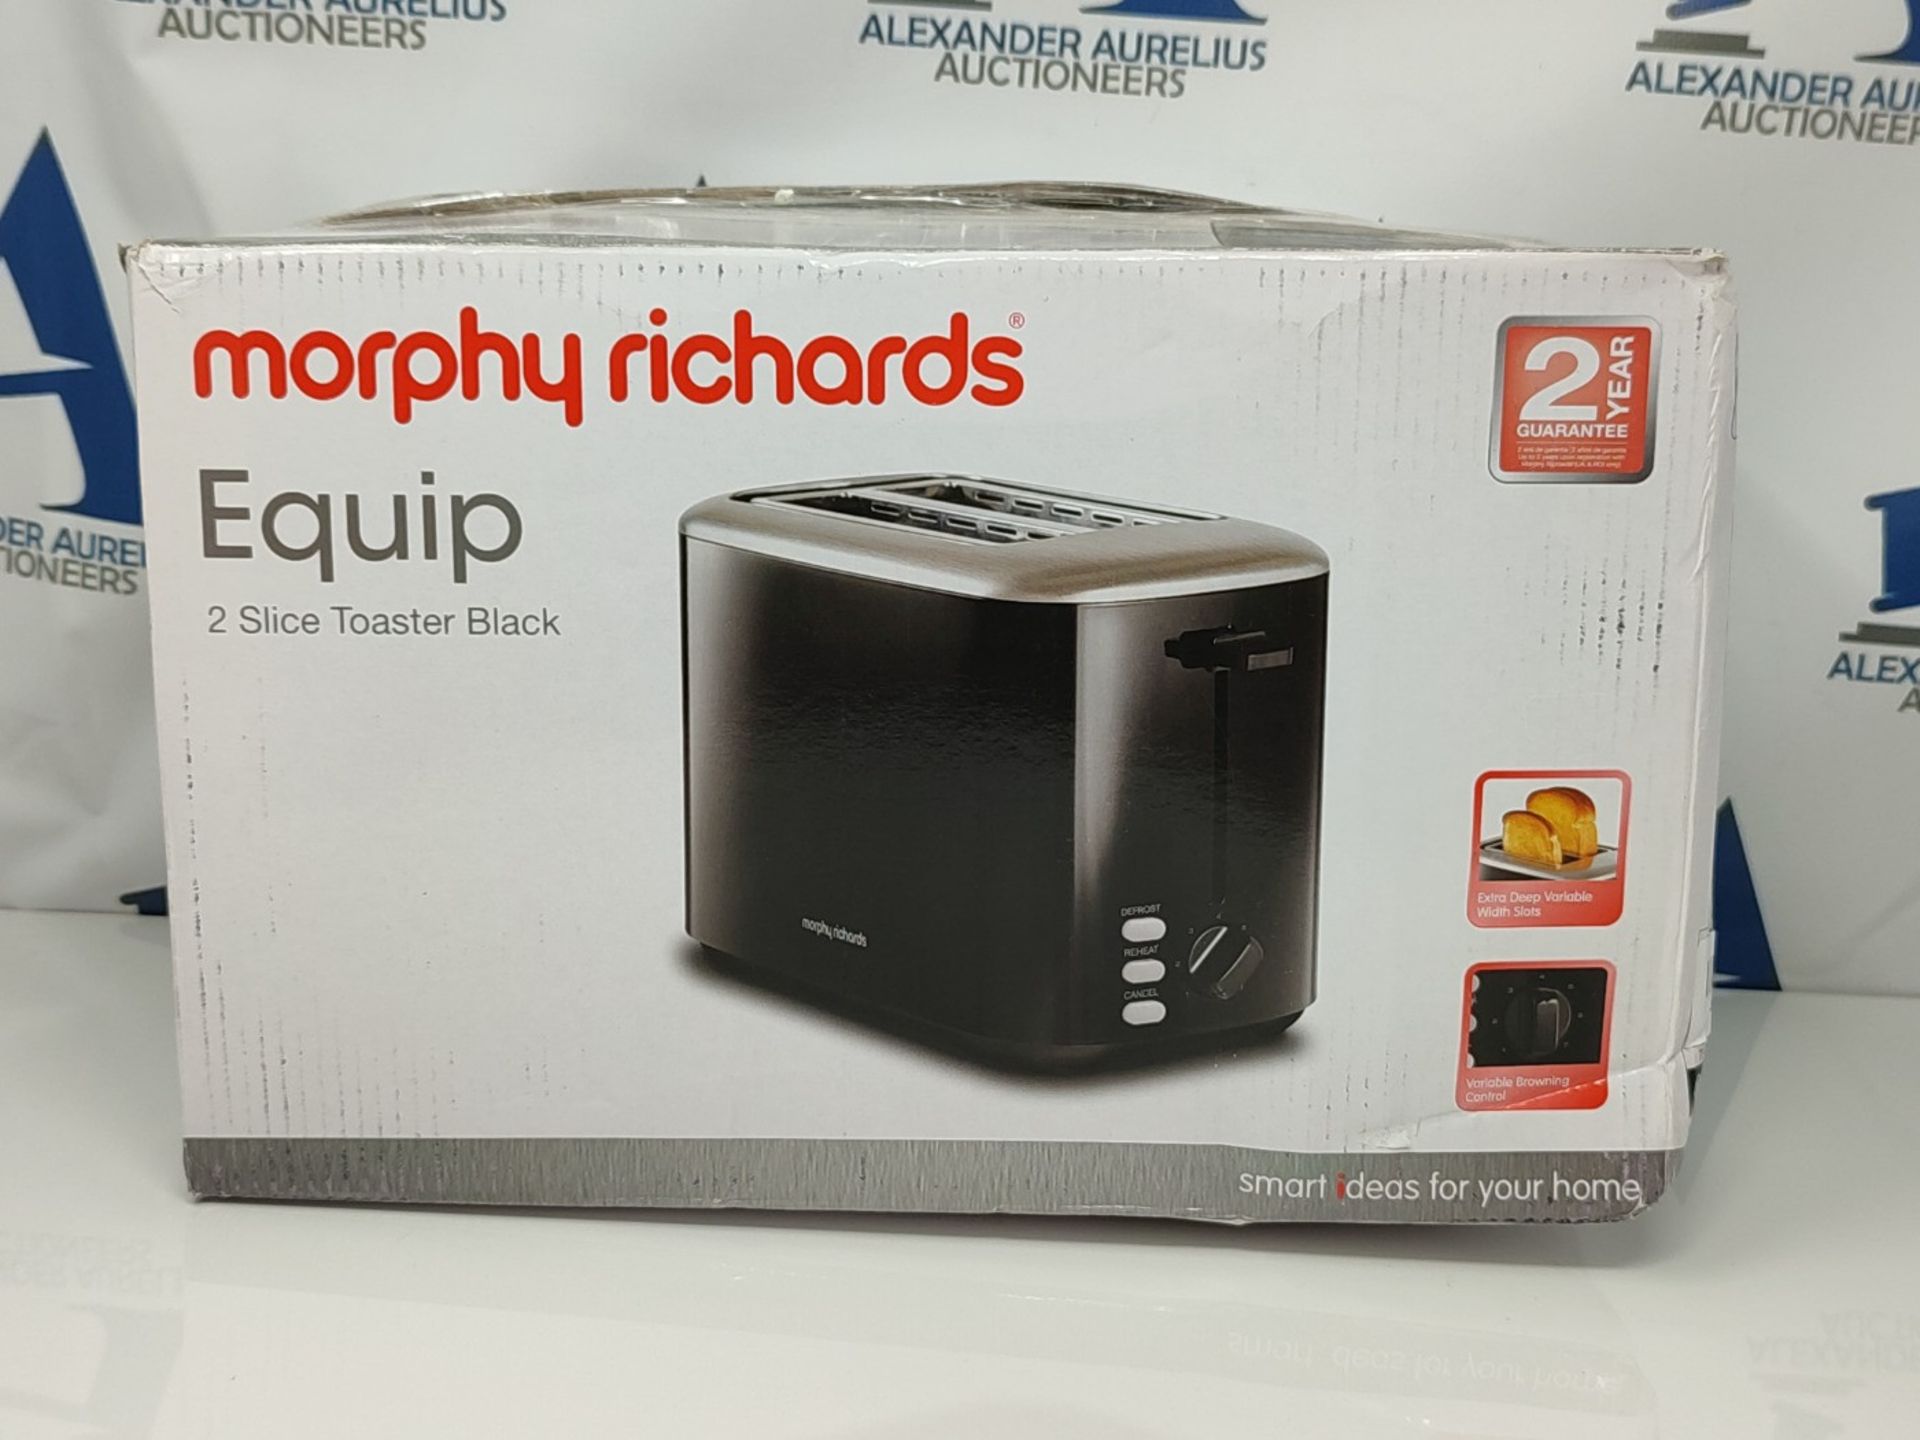 Morphy Richards Equip Black 2 Slice Toaster - Defrost And Reheat Settings - 2 Slot - S - Image 2 of 3